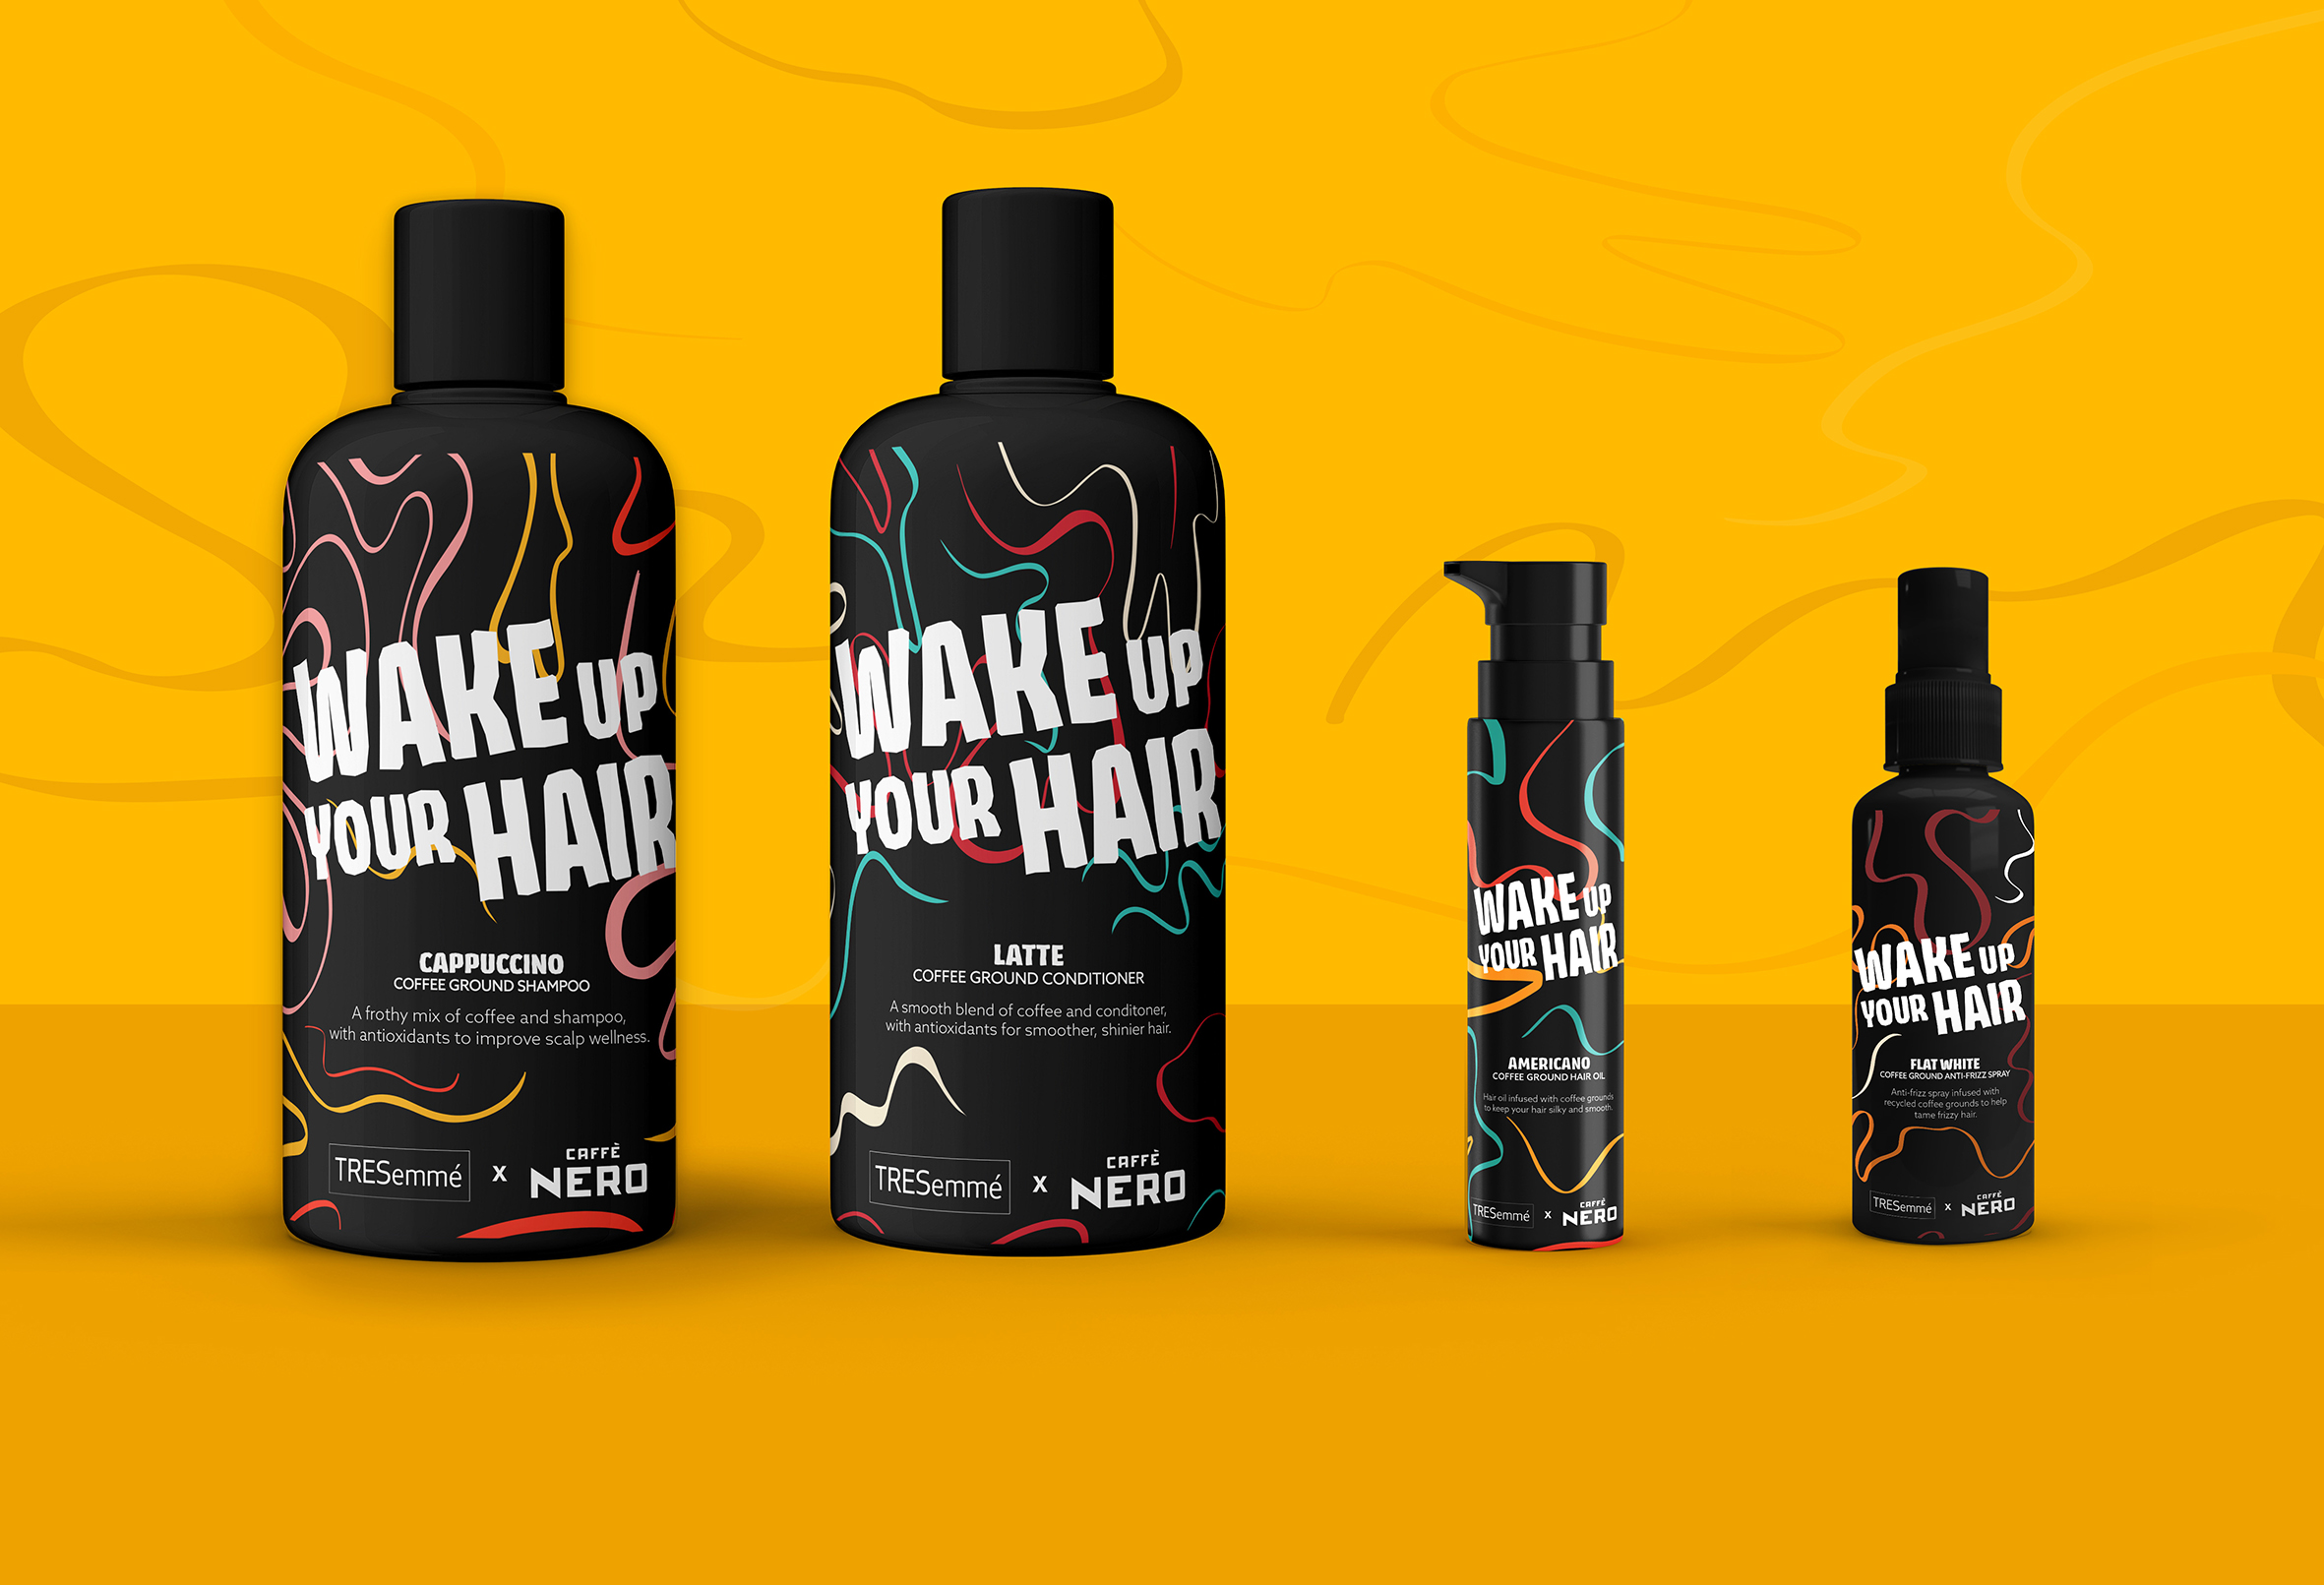 Vibrant bottle designs for the brand Wake Up Your Hair, a collaboration between Caffe Nero and Tresemme, on yellow background.